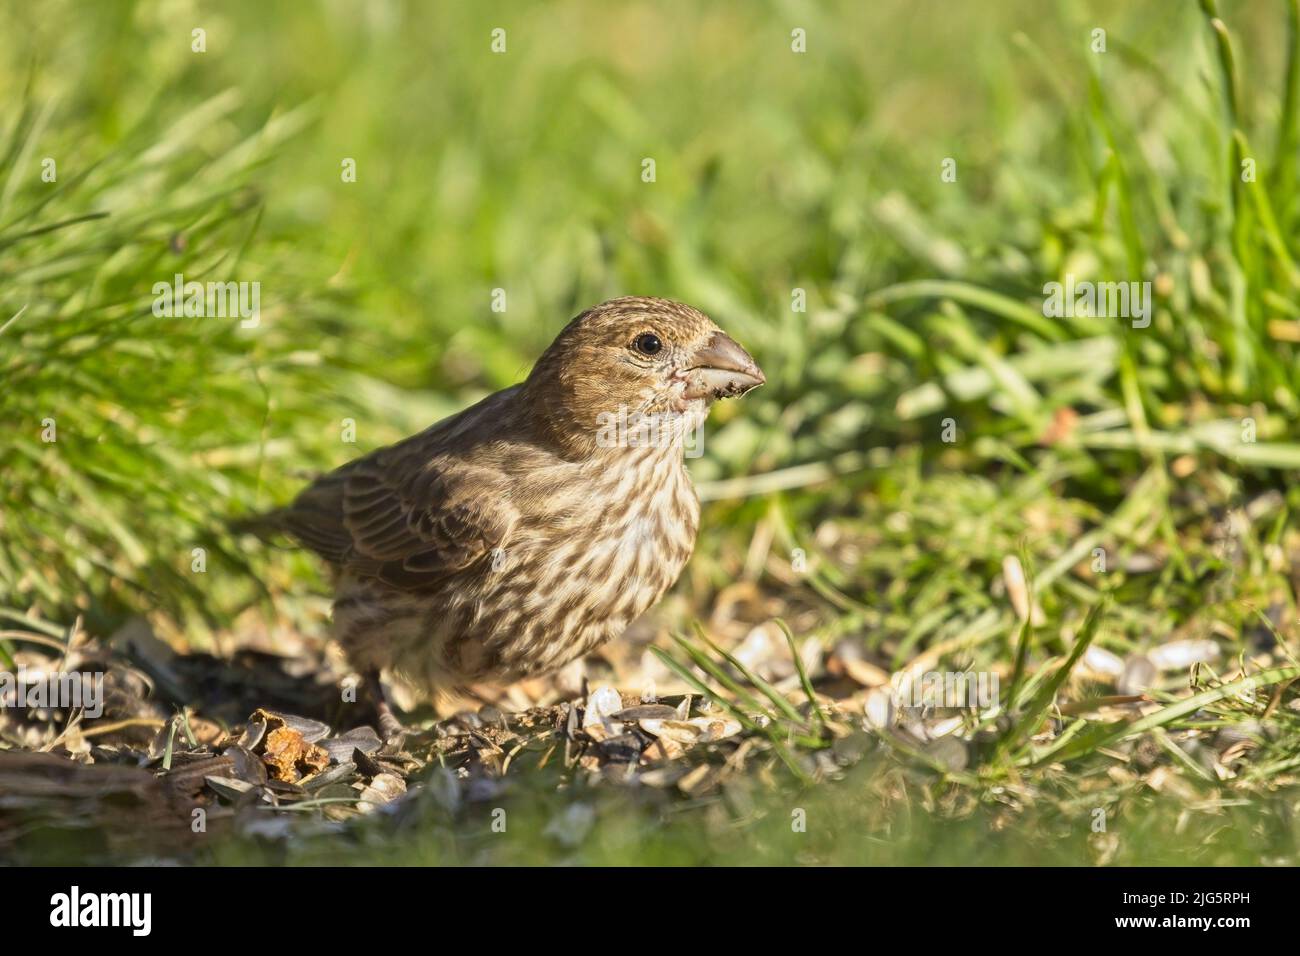 A small sparrow is on the ground searching for food in Rathdrum, Idaho. Stock Photo